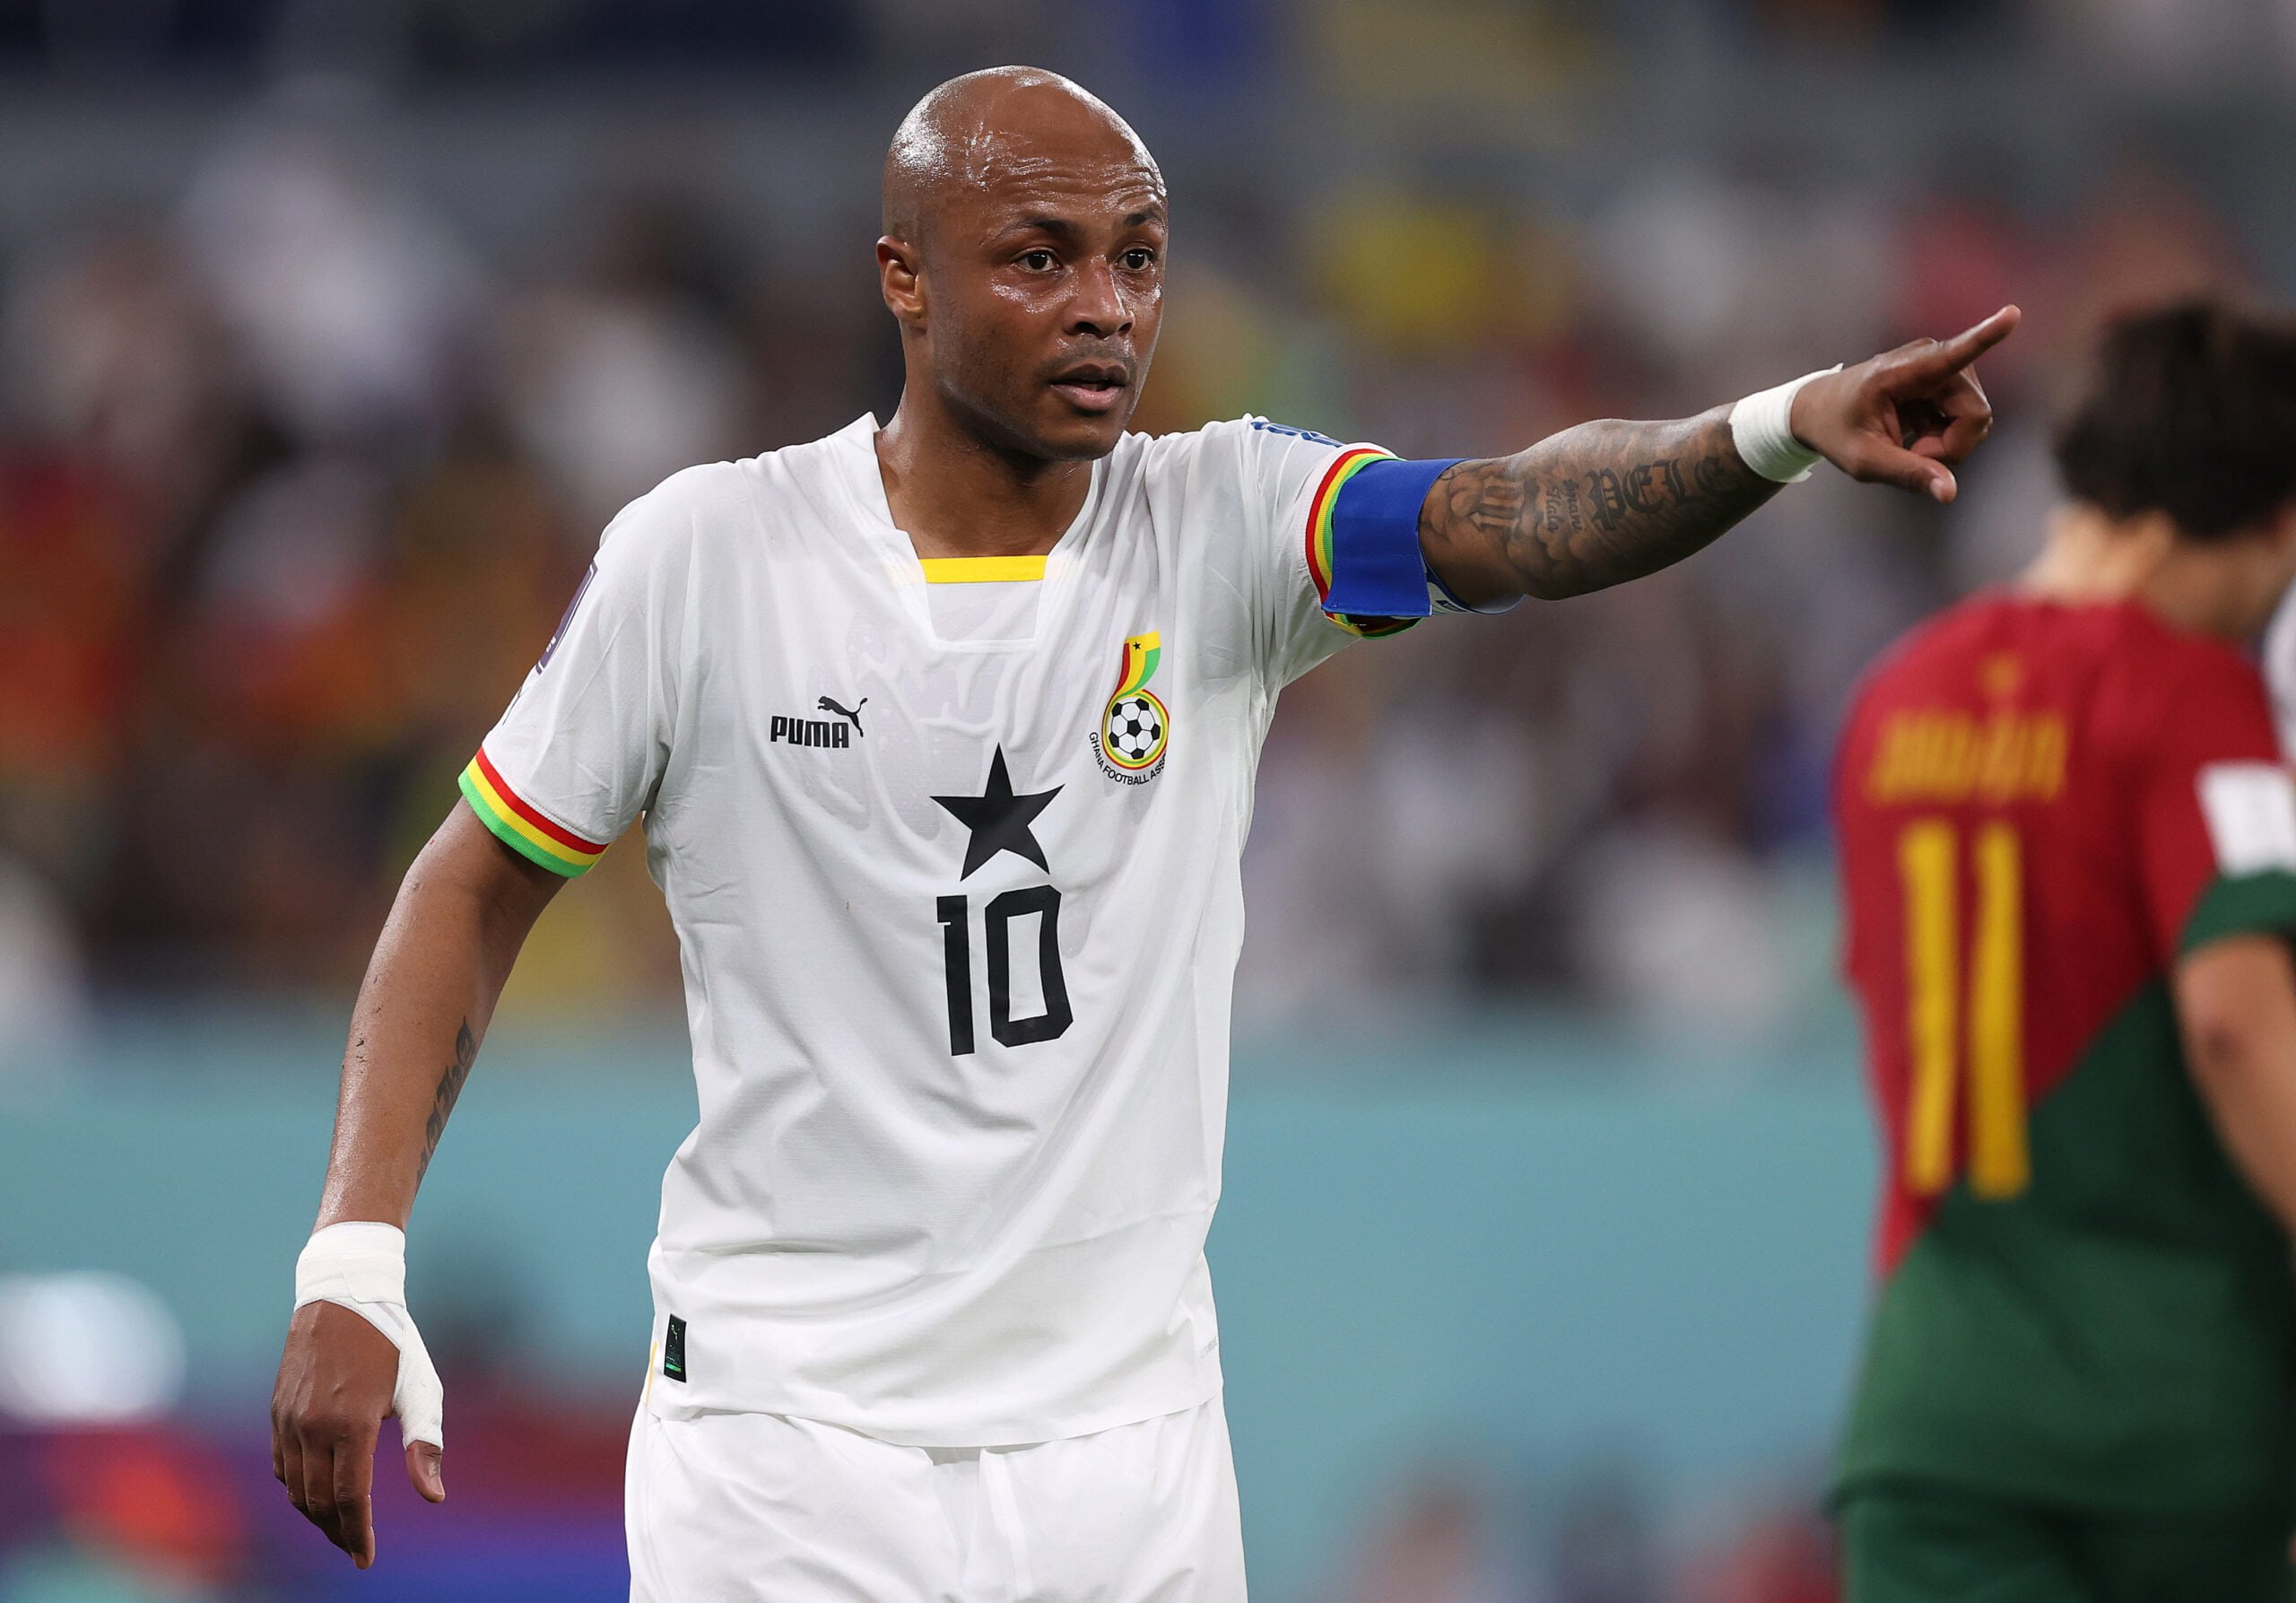 Andre Ayew guide le Ghana